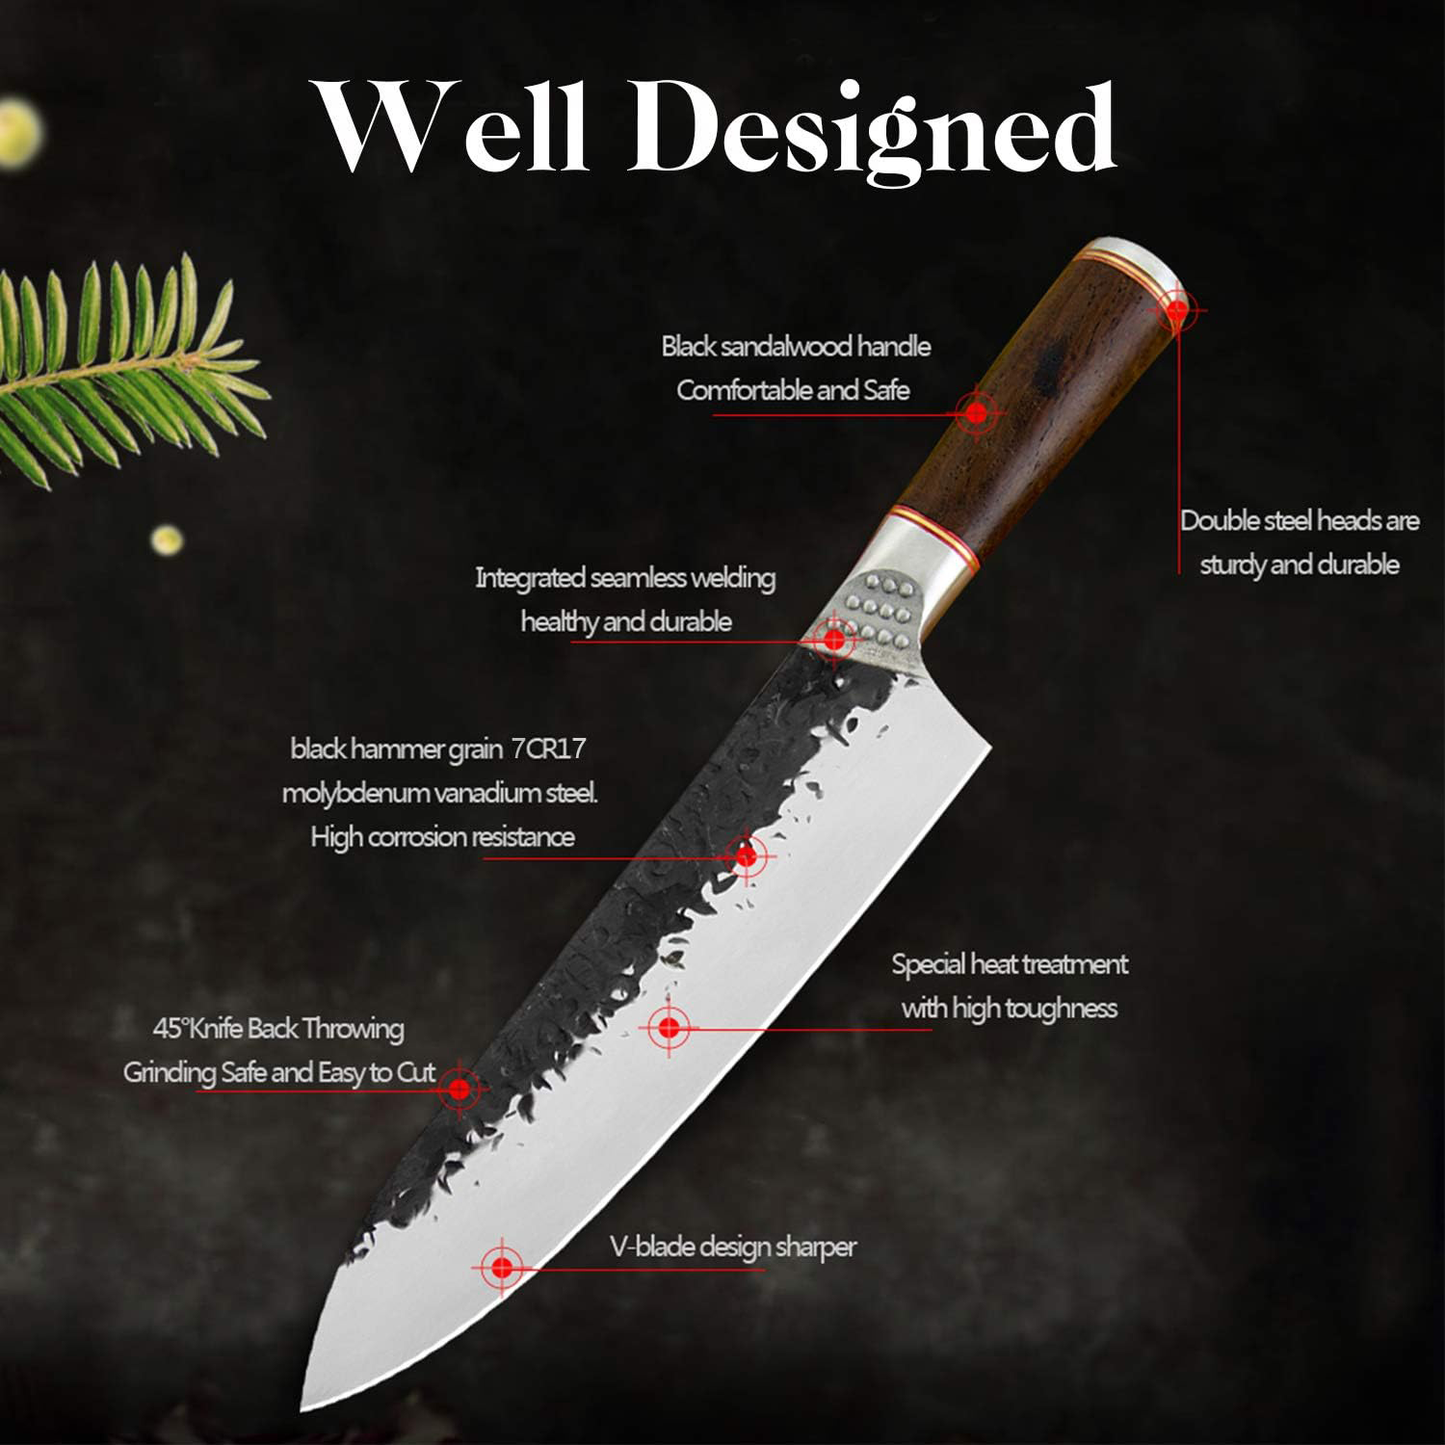 KD 8-Inch Japanese Chef's Knife: Precision Culinary Mastery